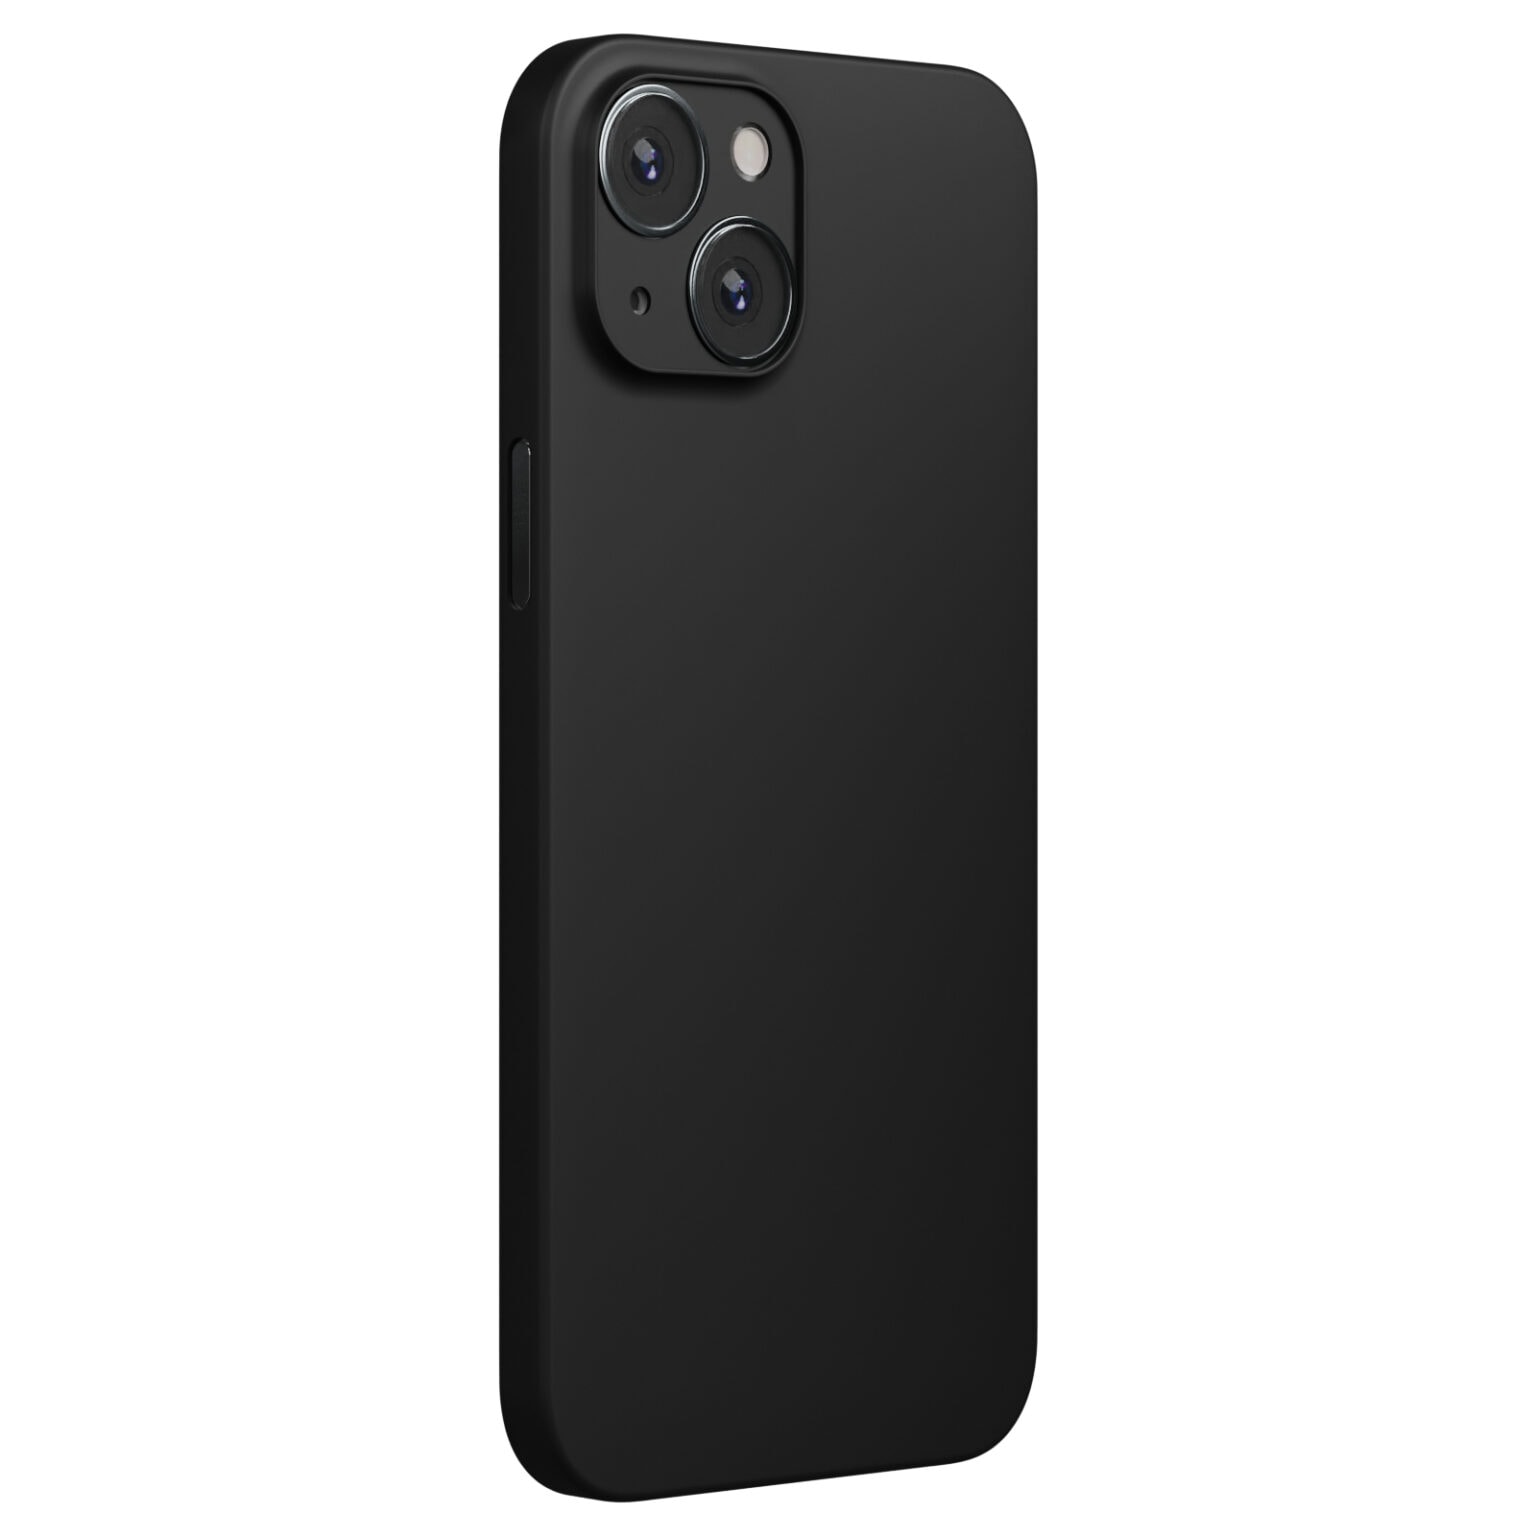 PHNX tthin cases for iPhone 13 are sleek but protective.